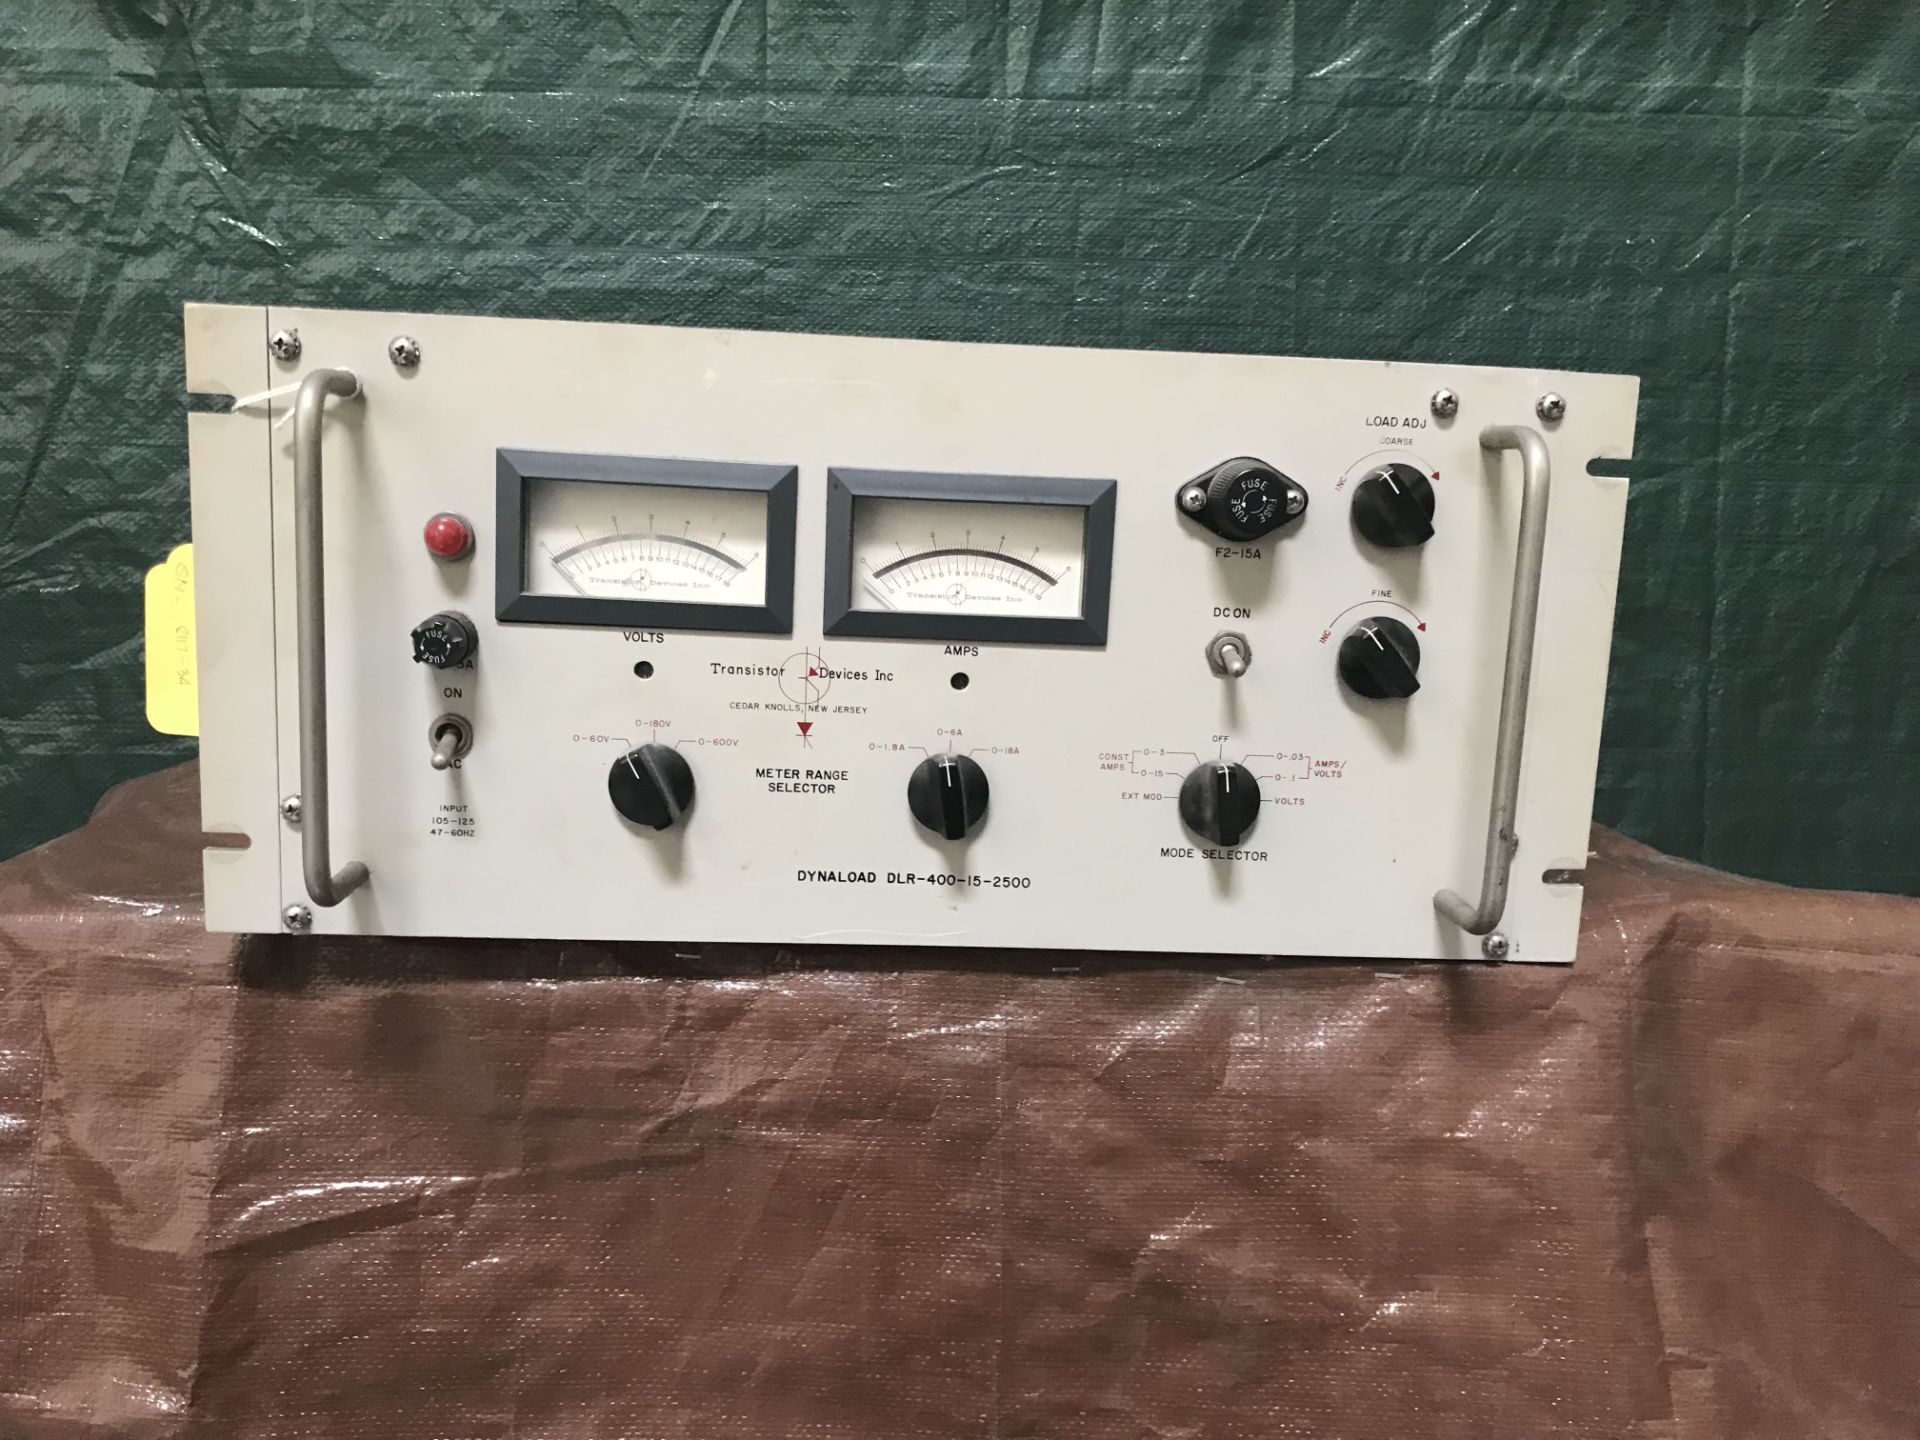 #036 Transistor Devices, Inc. Dynaload DLR-400-15-2500 Electronic Load Test System